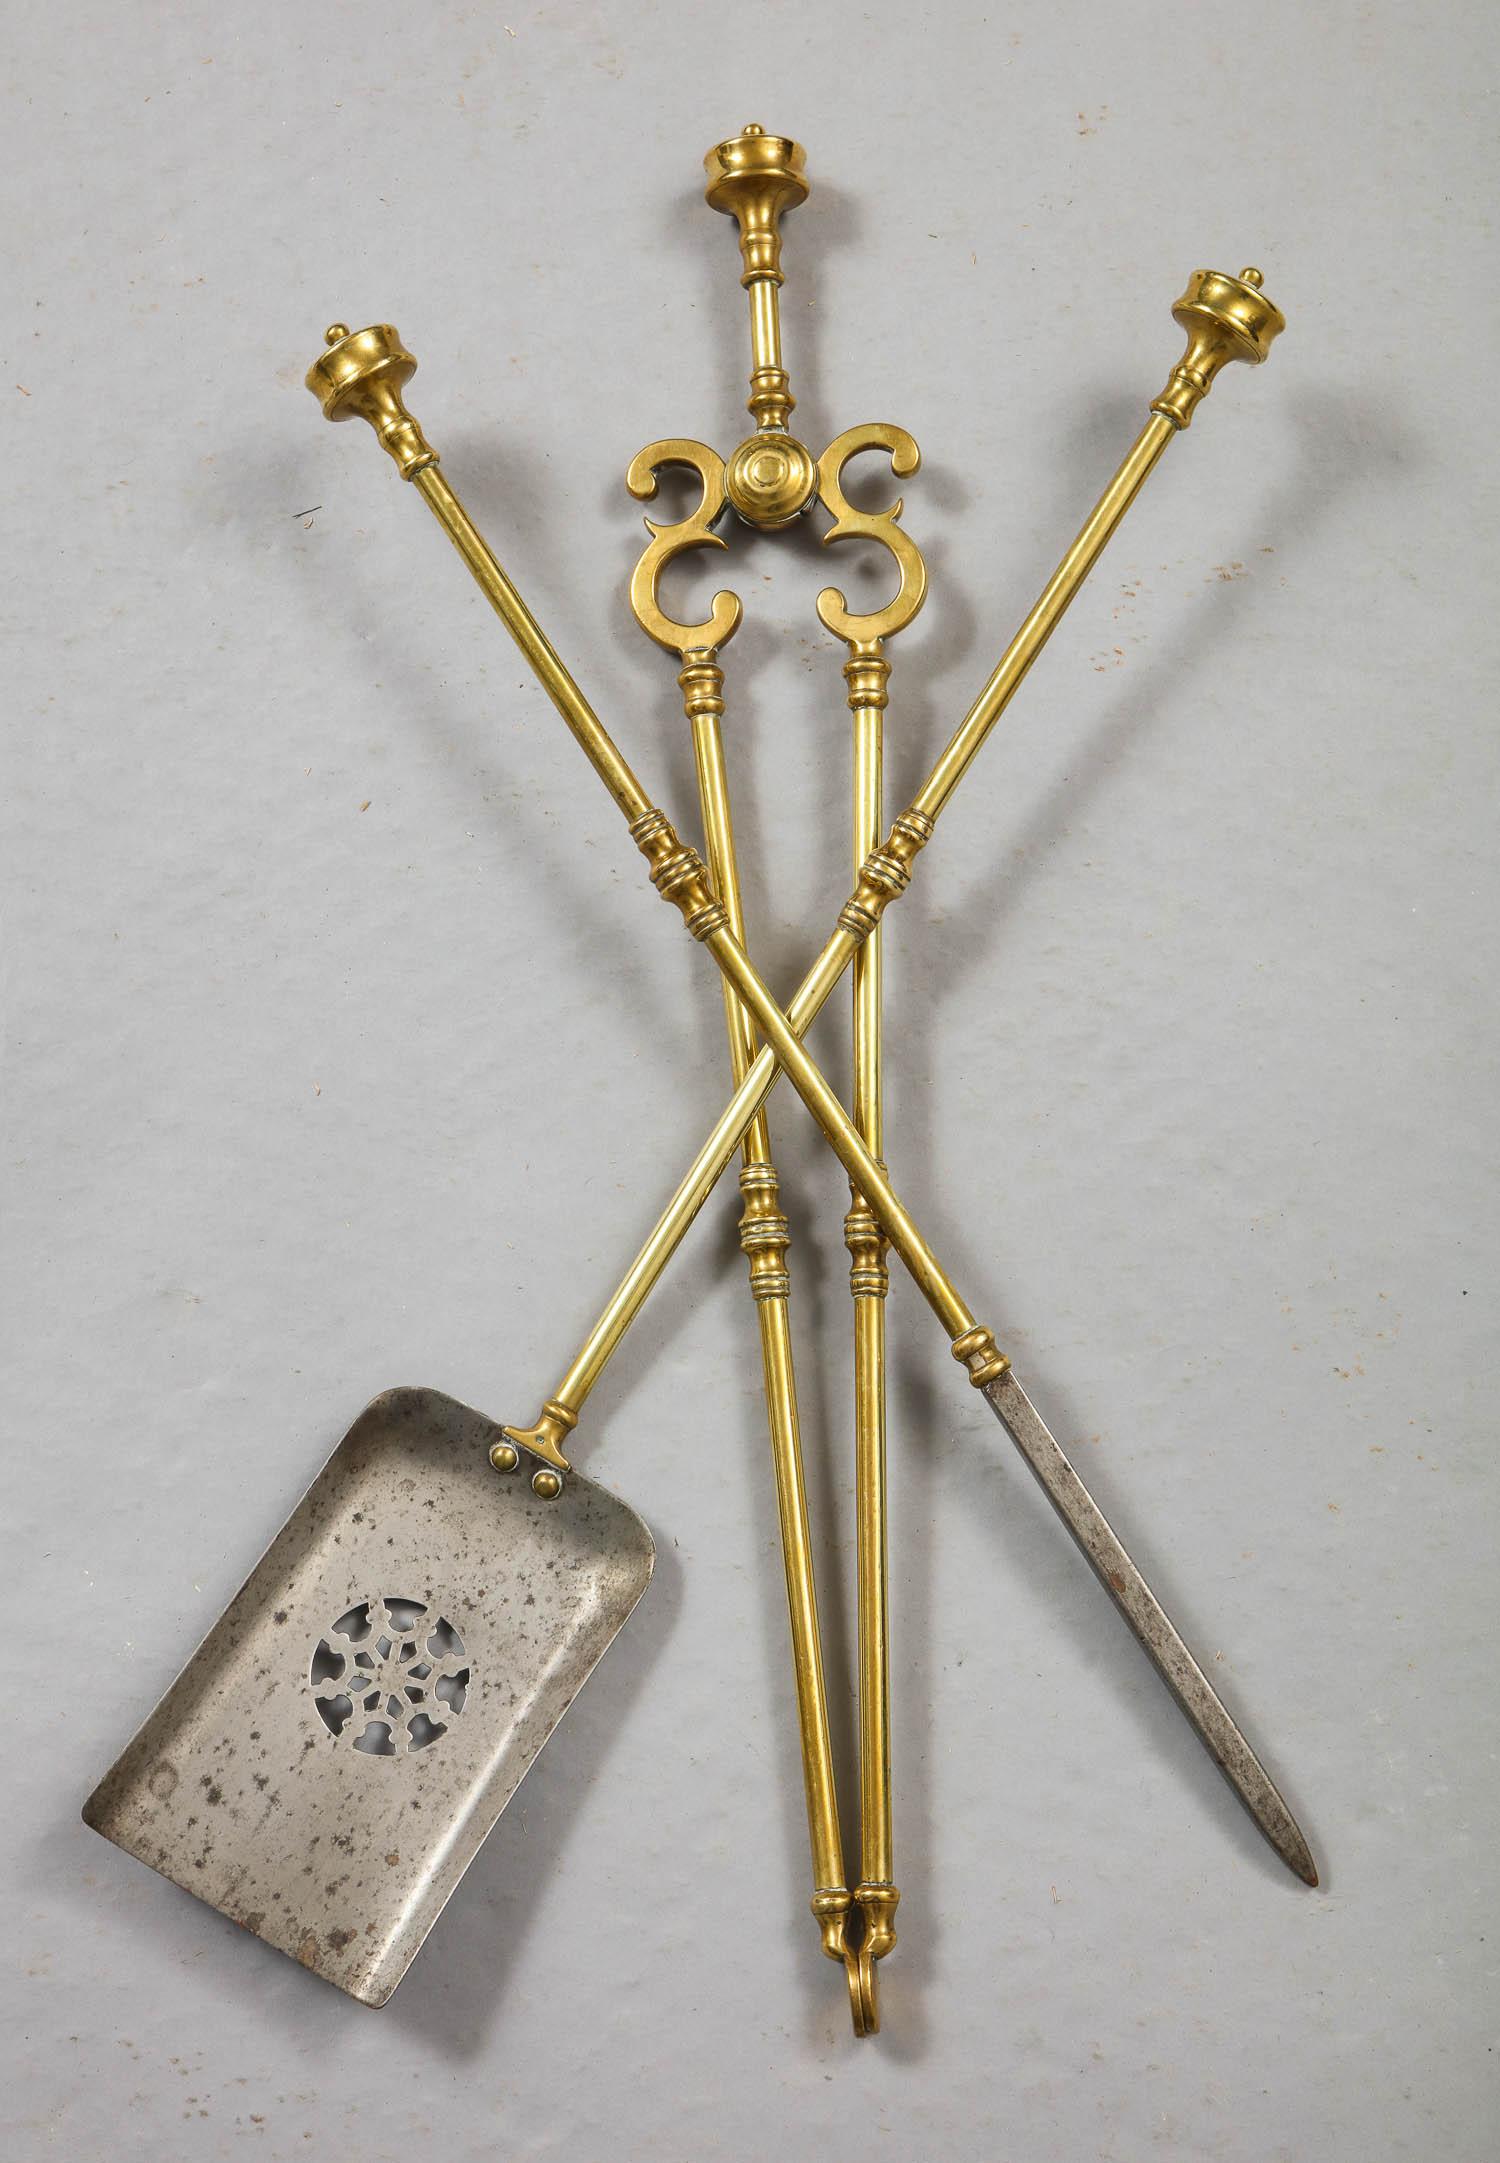 Fine set of English 19th century brass and steel fire tools having turned turret handles, the shovel with pierced steel basin having snowflake decoration.